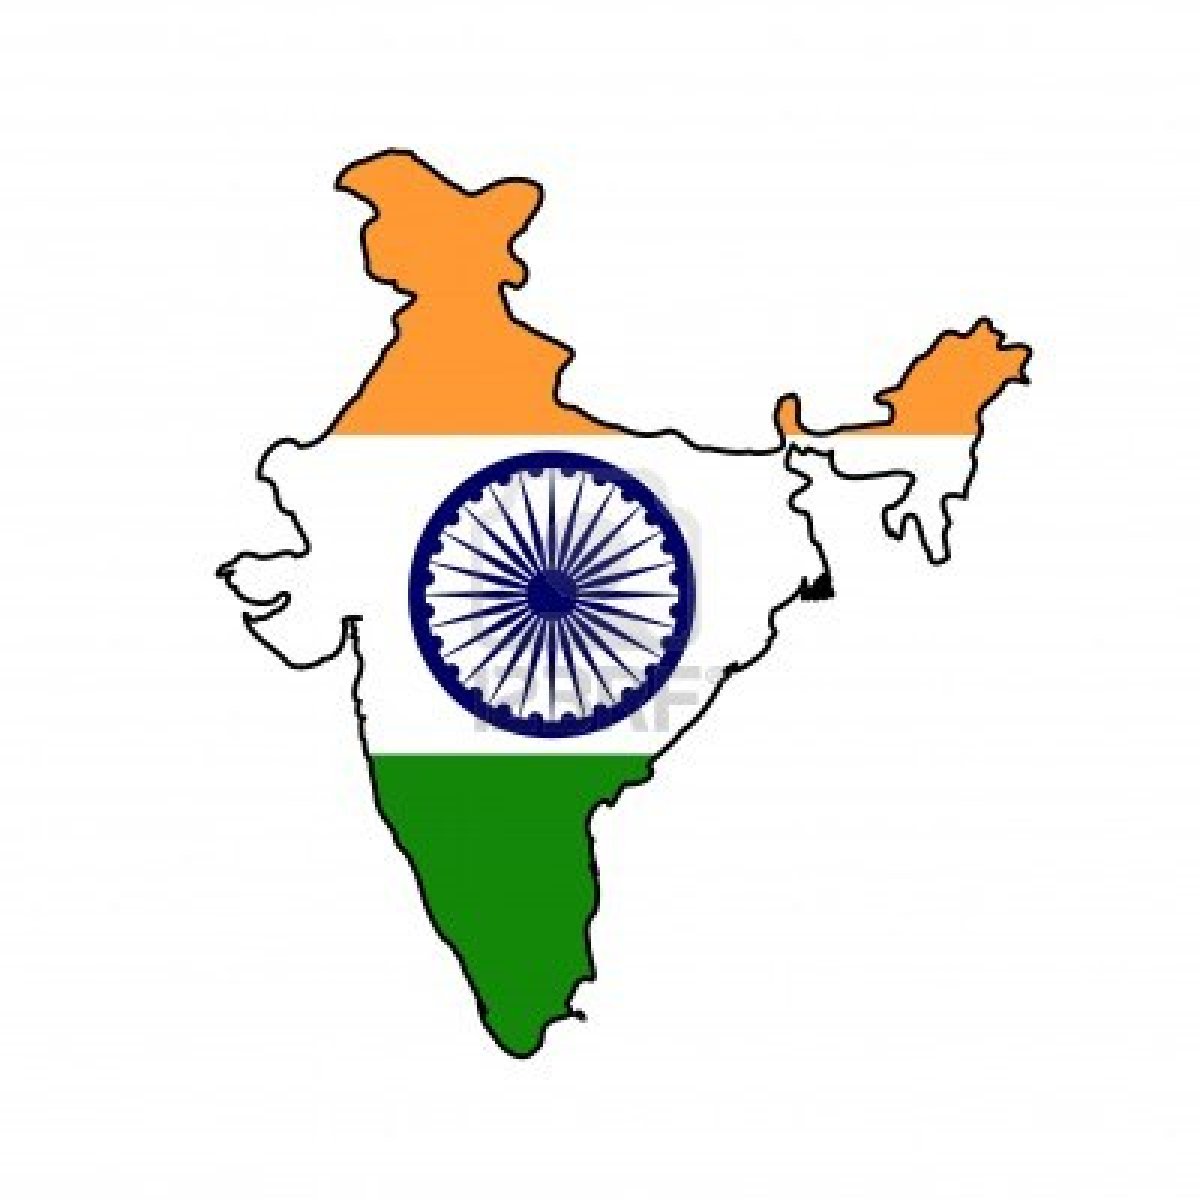 9320566-illustration-of-the-india-flag-on-map-of-country-isolated-on-white-background